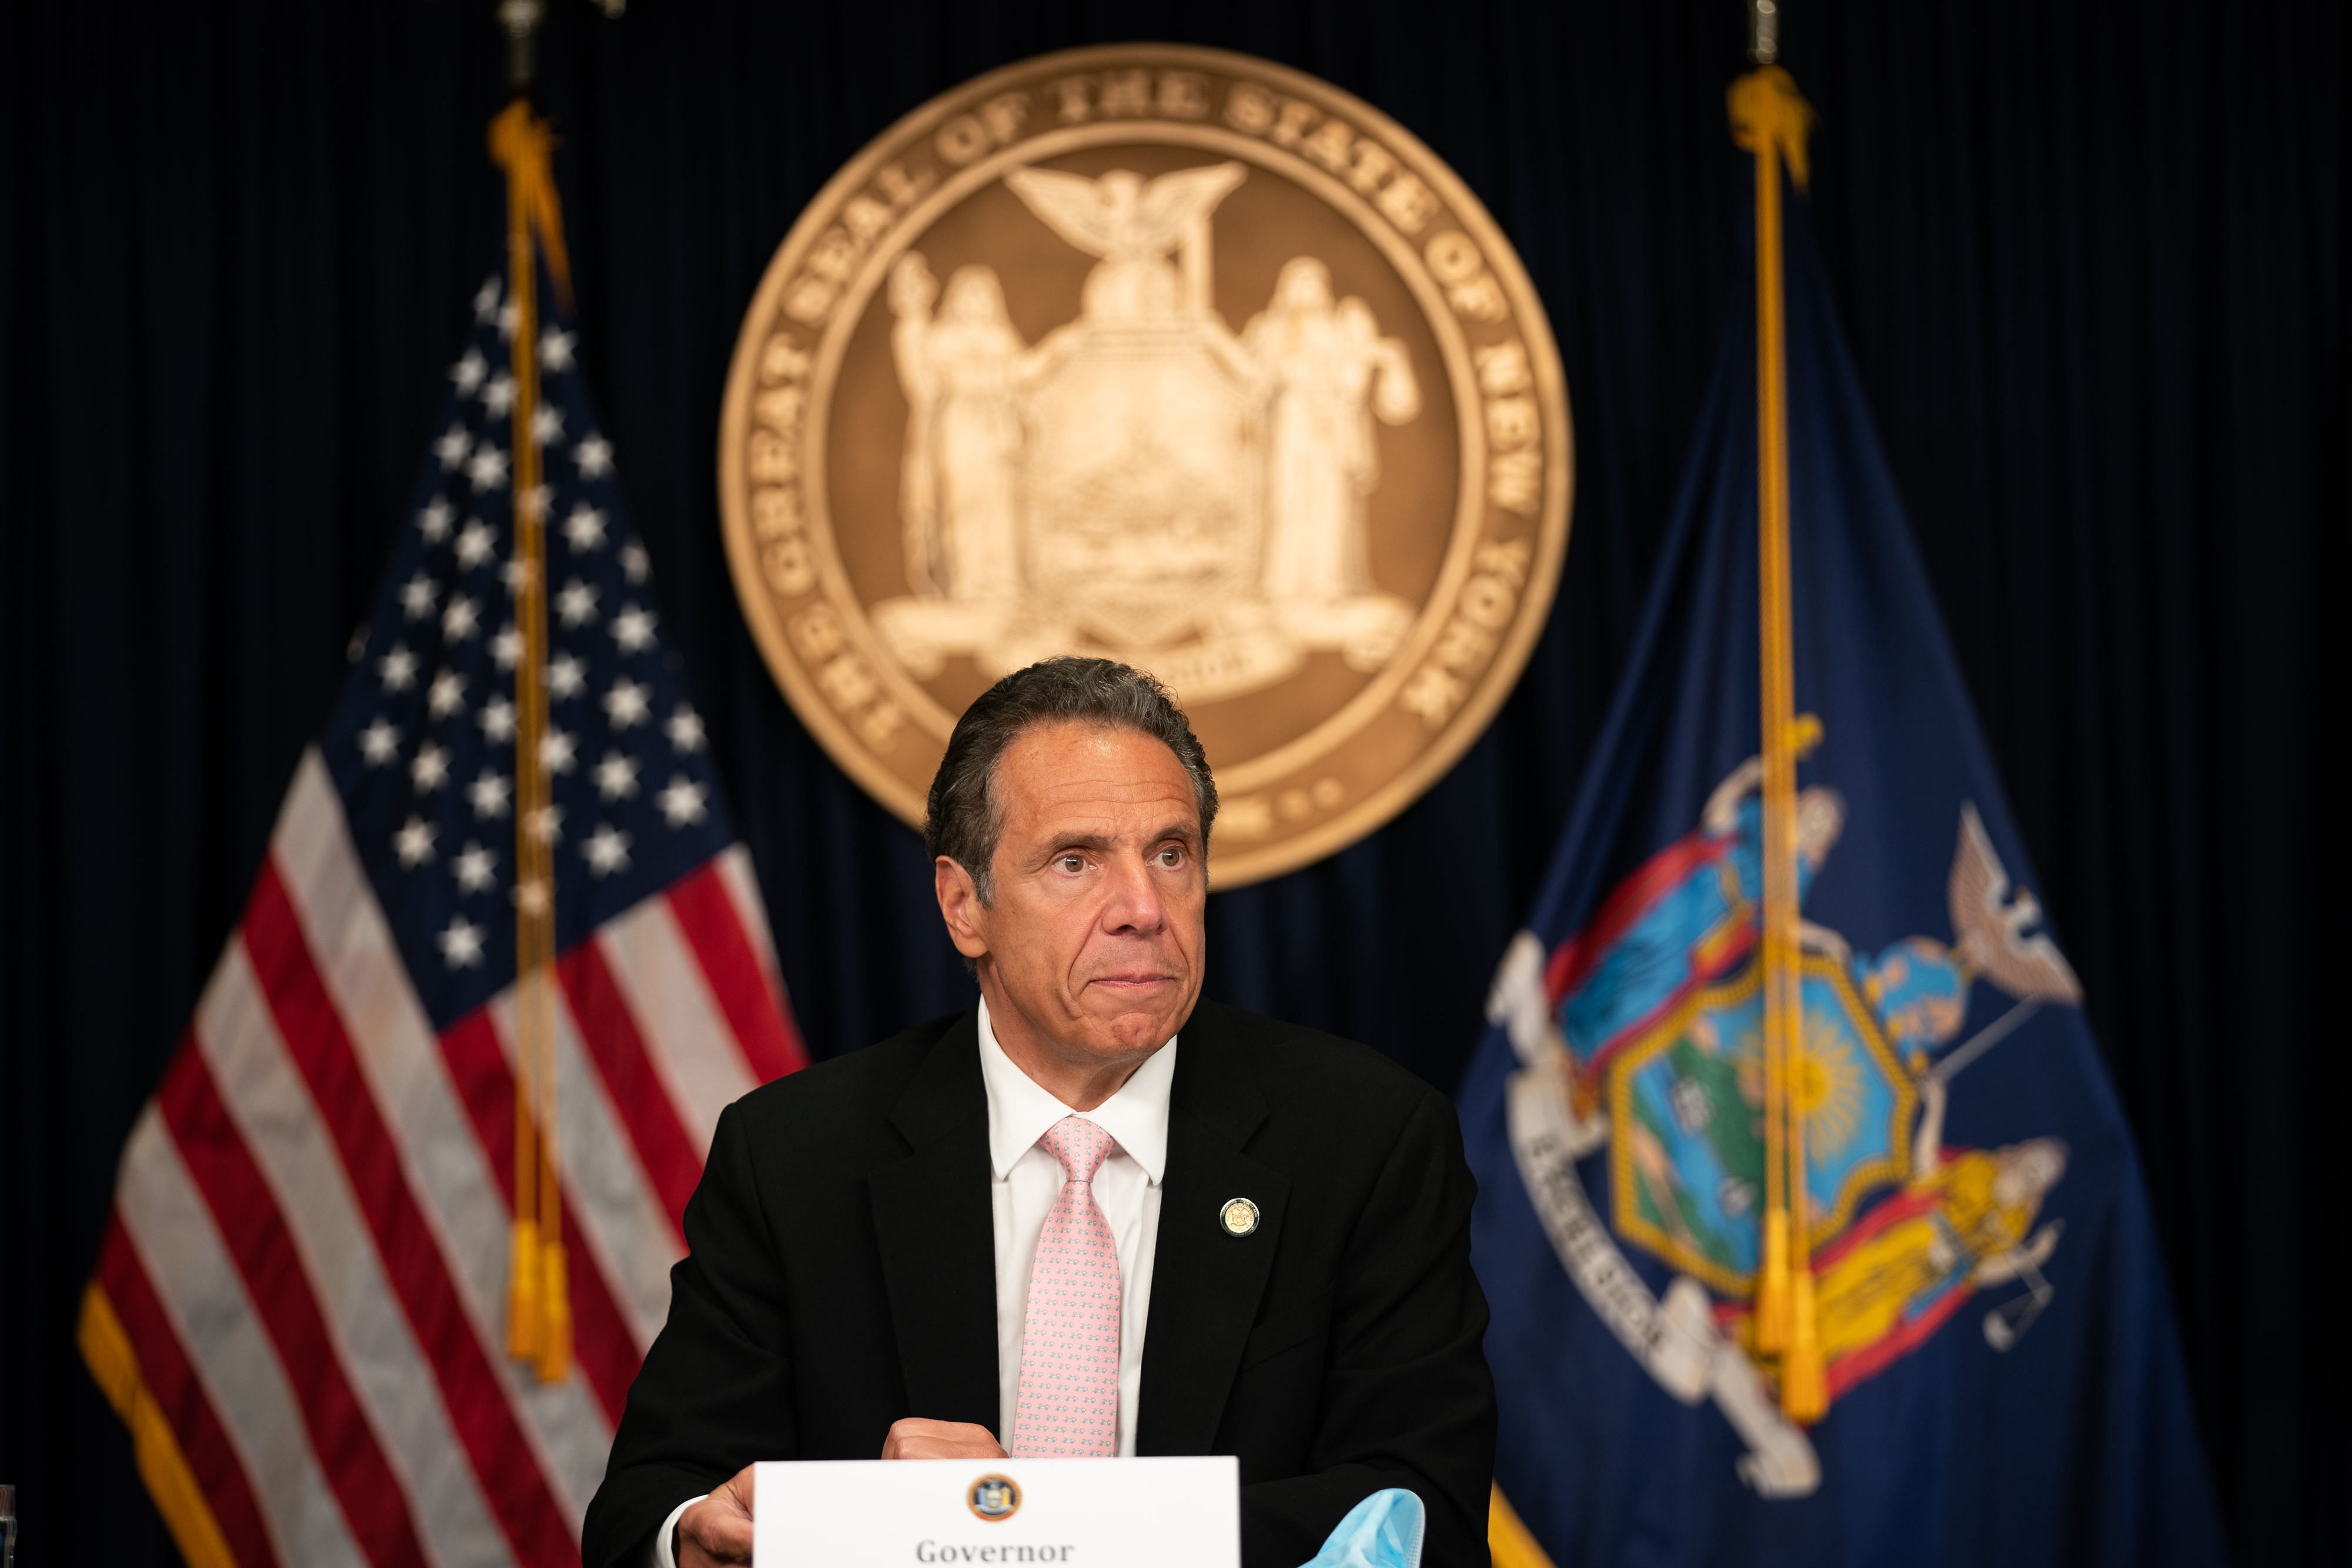 NY governor Andrew Cuomo. Credit: AFP Photo